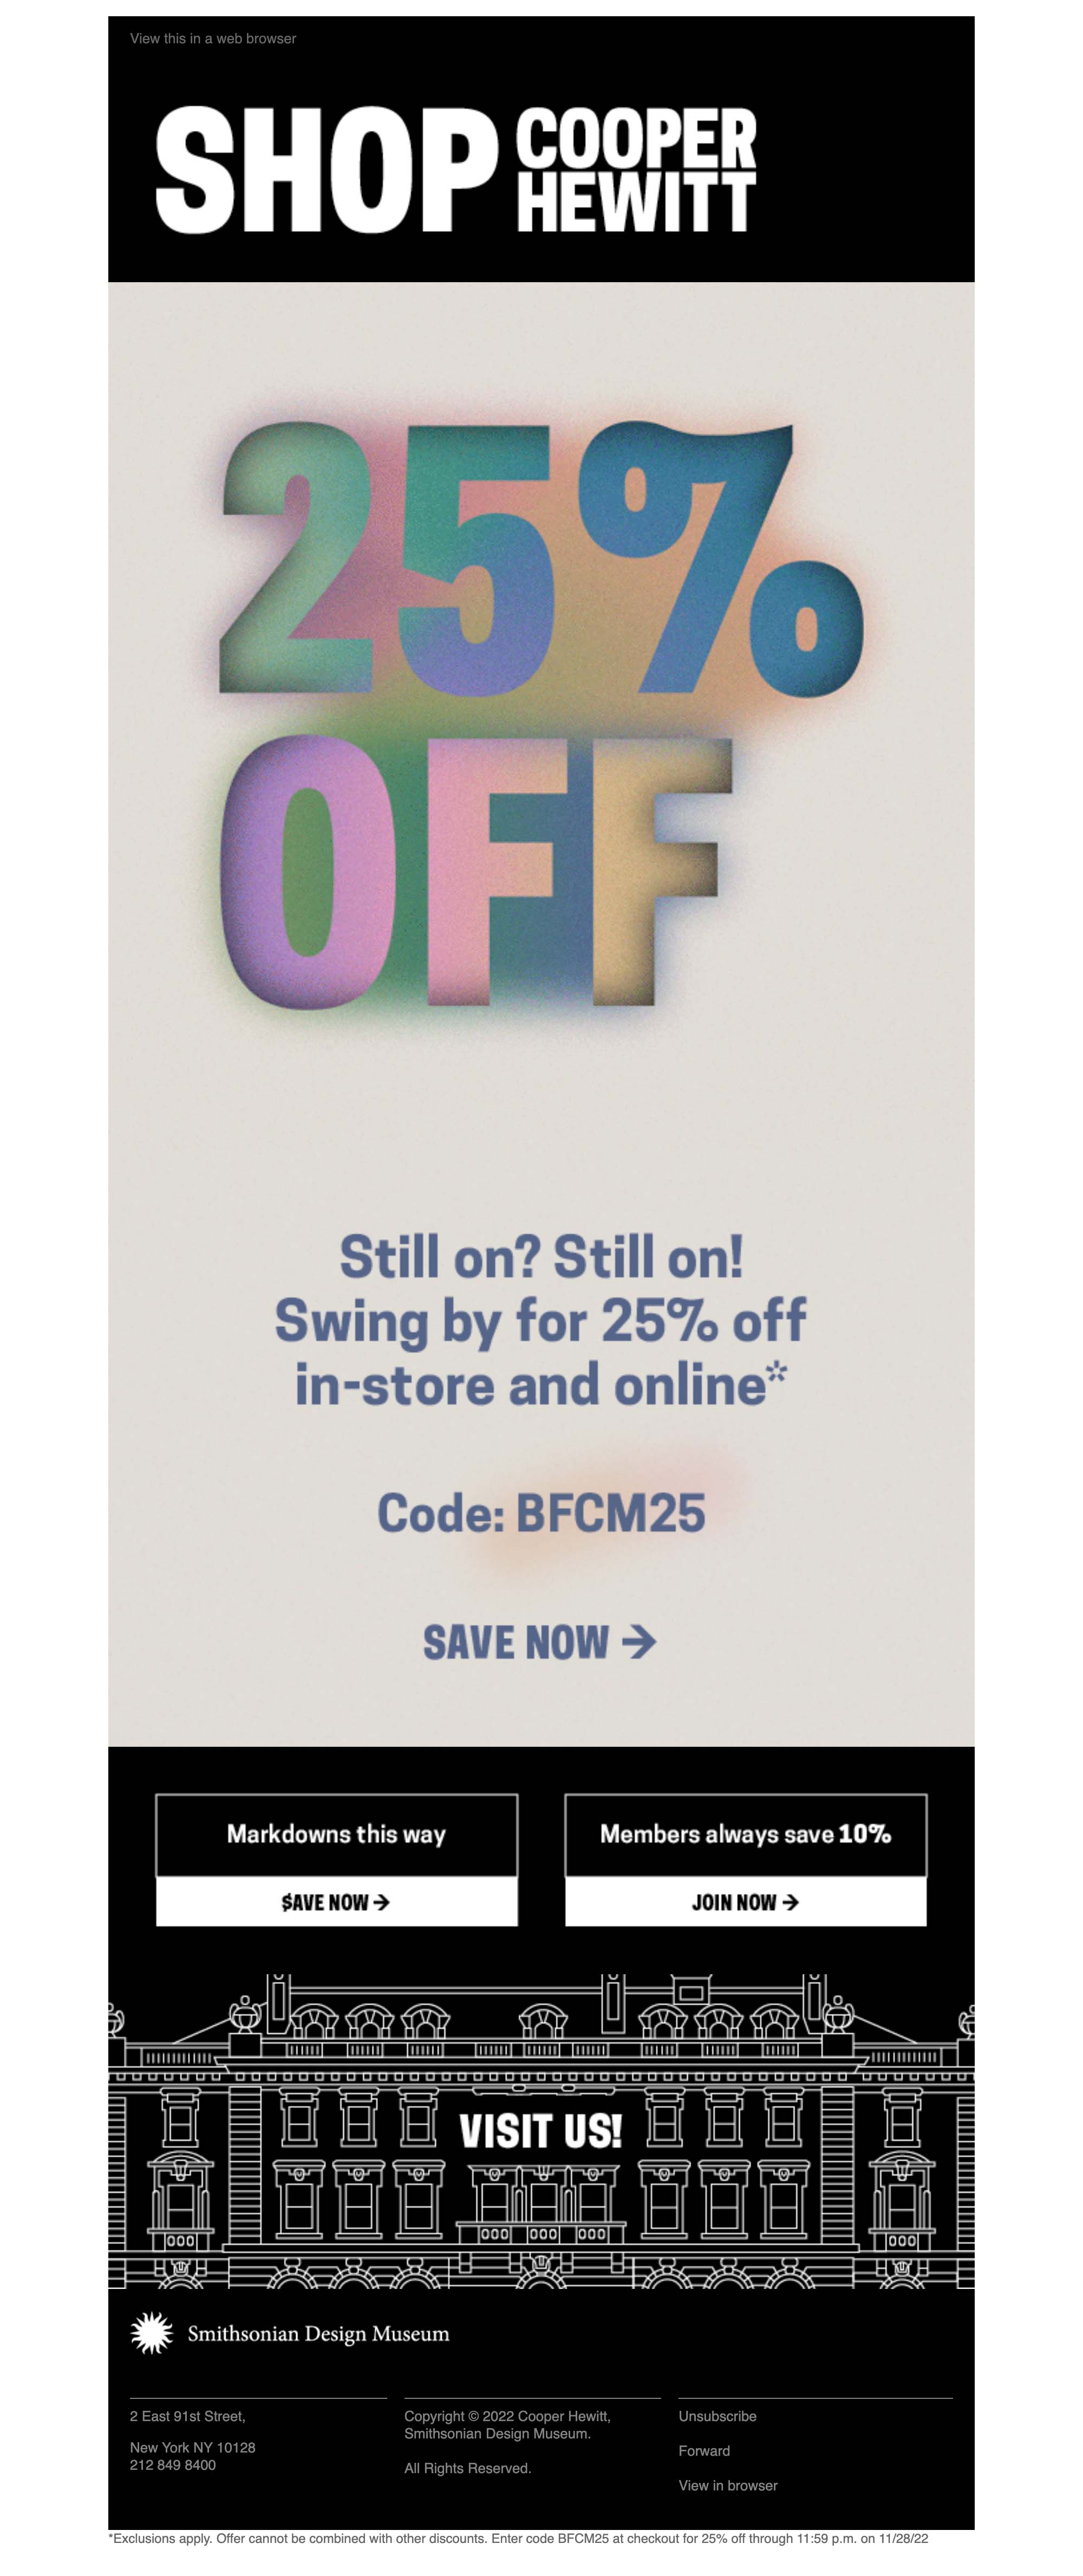 But wait, there's more (re: 25% Off) - desktop view